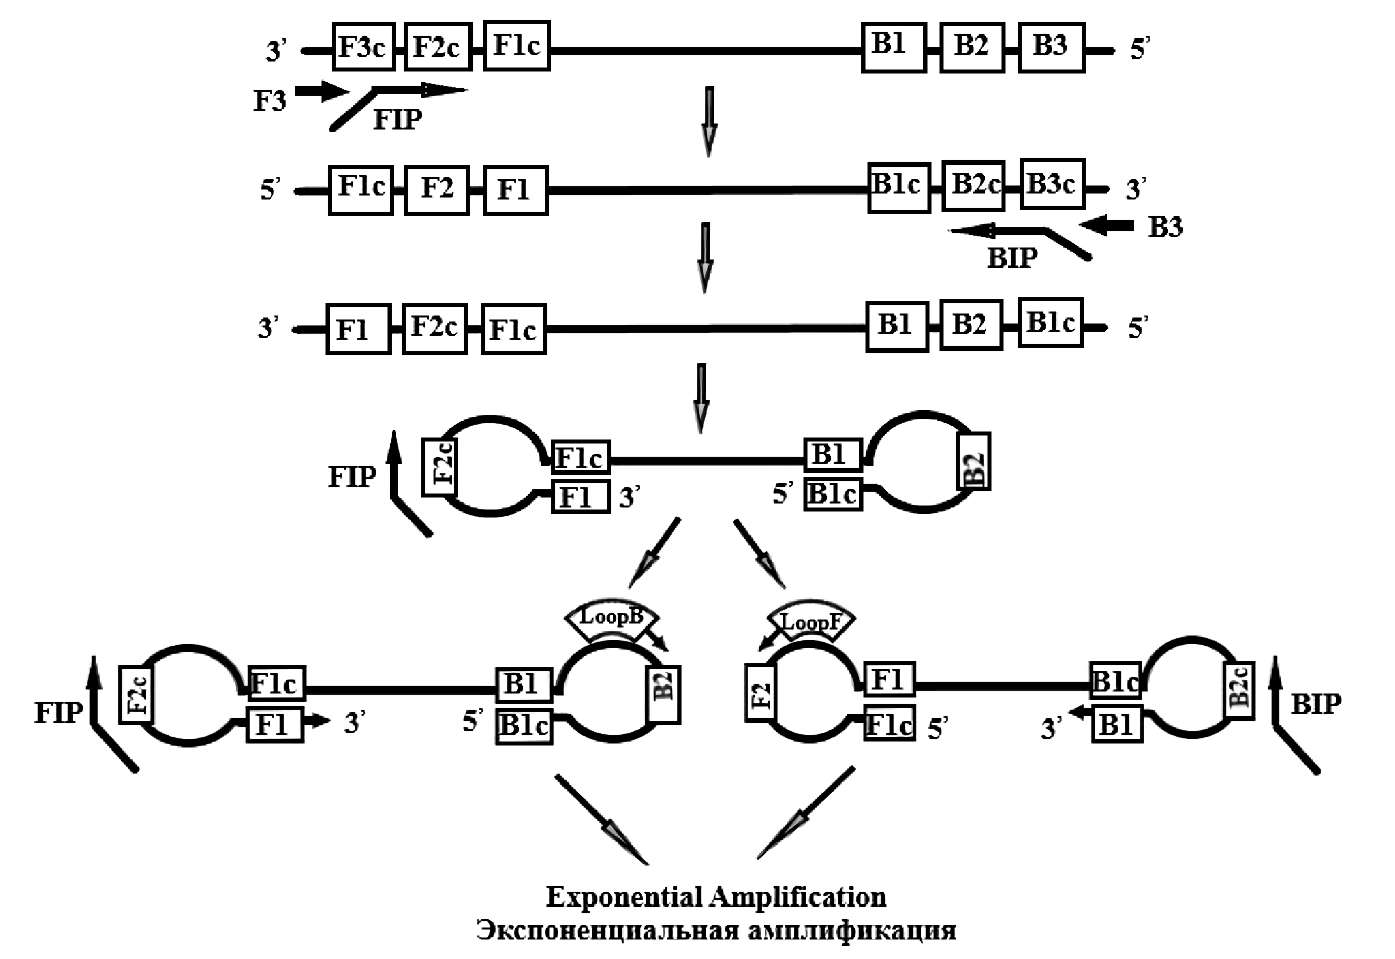 Comparative analysis of methods for isothermal amplification of nucleic acids